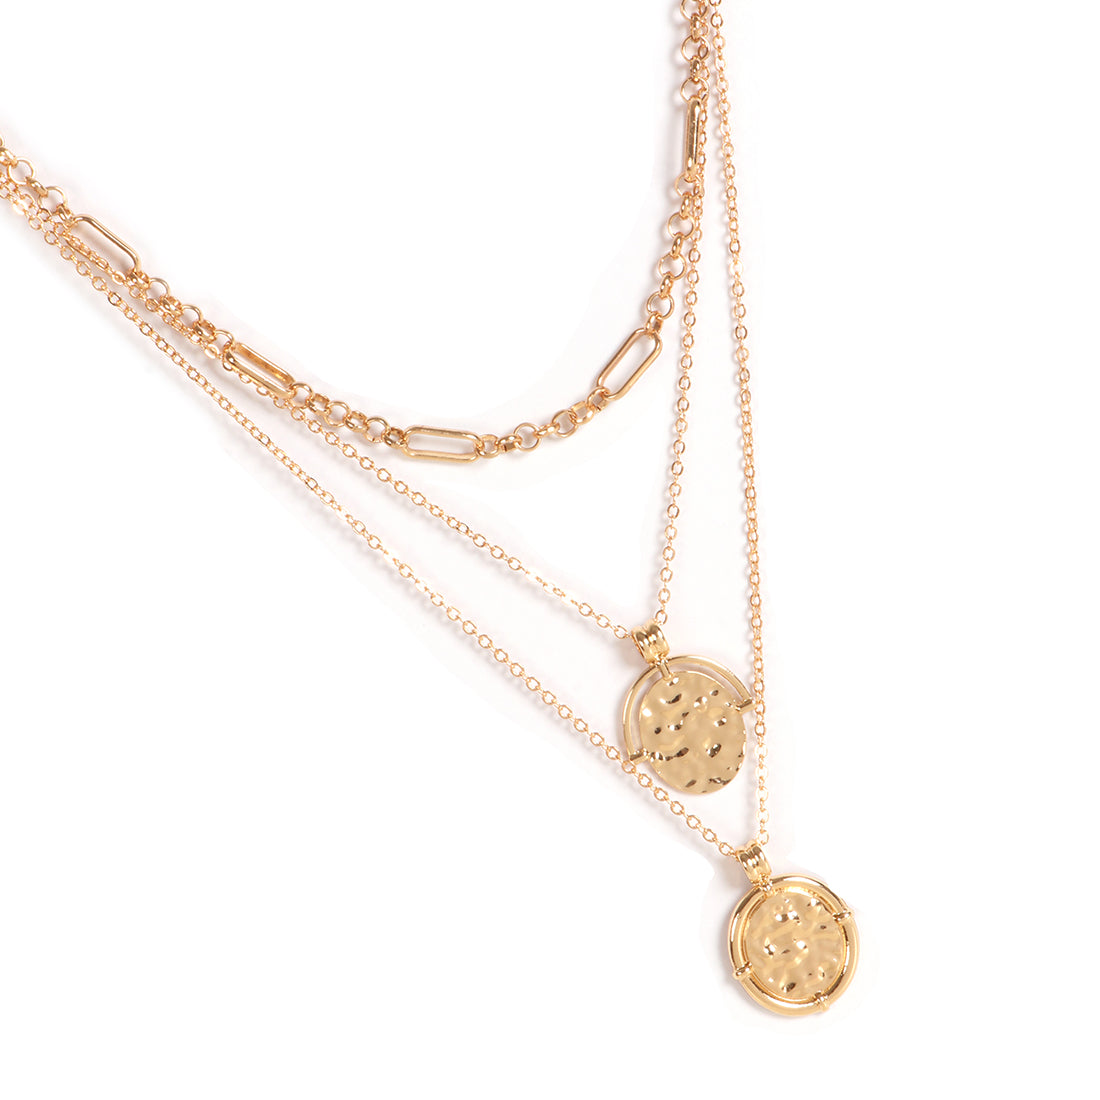 CHUNKY COIN PENDANT CHAIN-LINK STATEMENT GOLD-TONED LAYERED NECKLACE